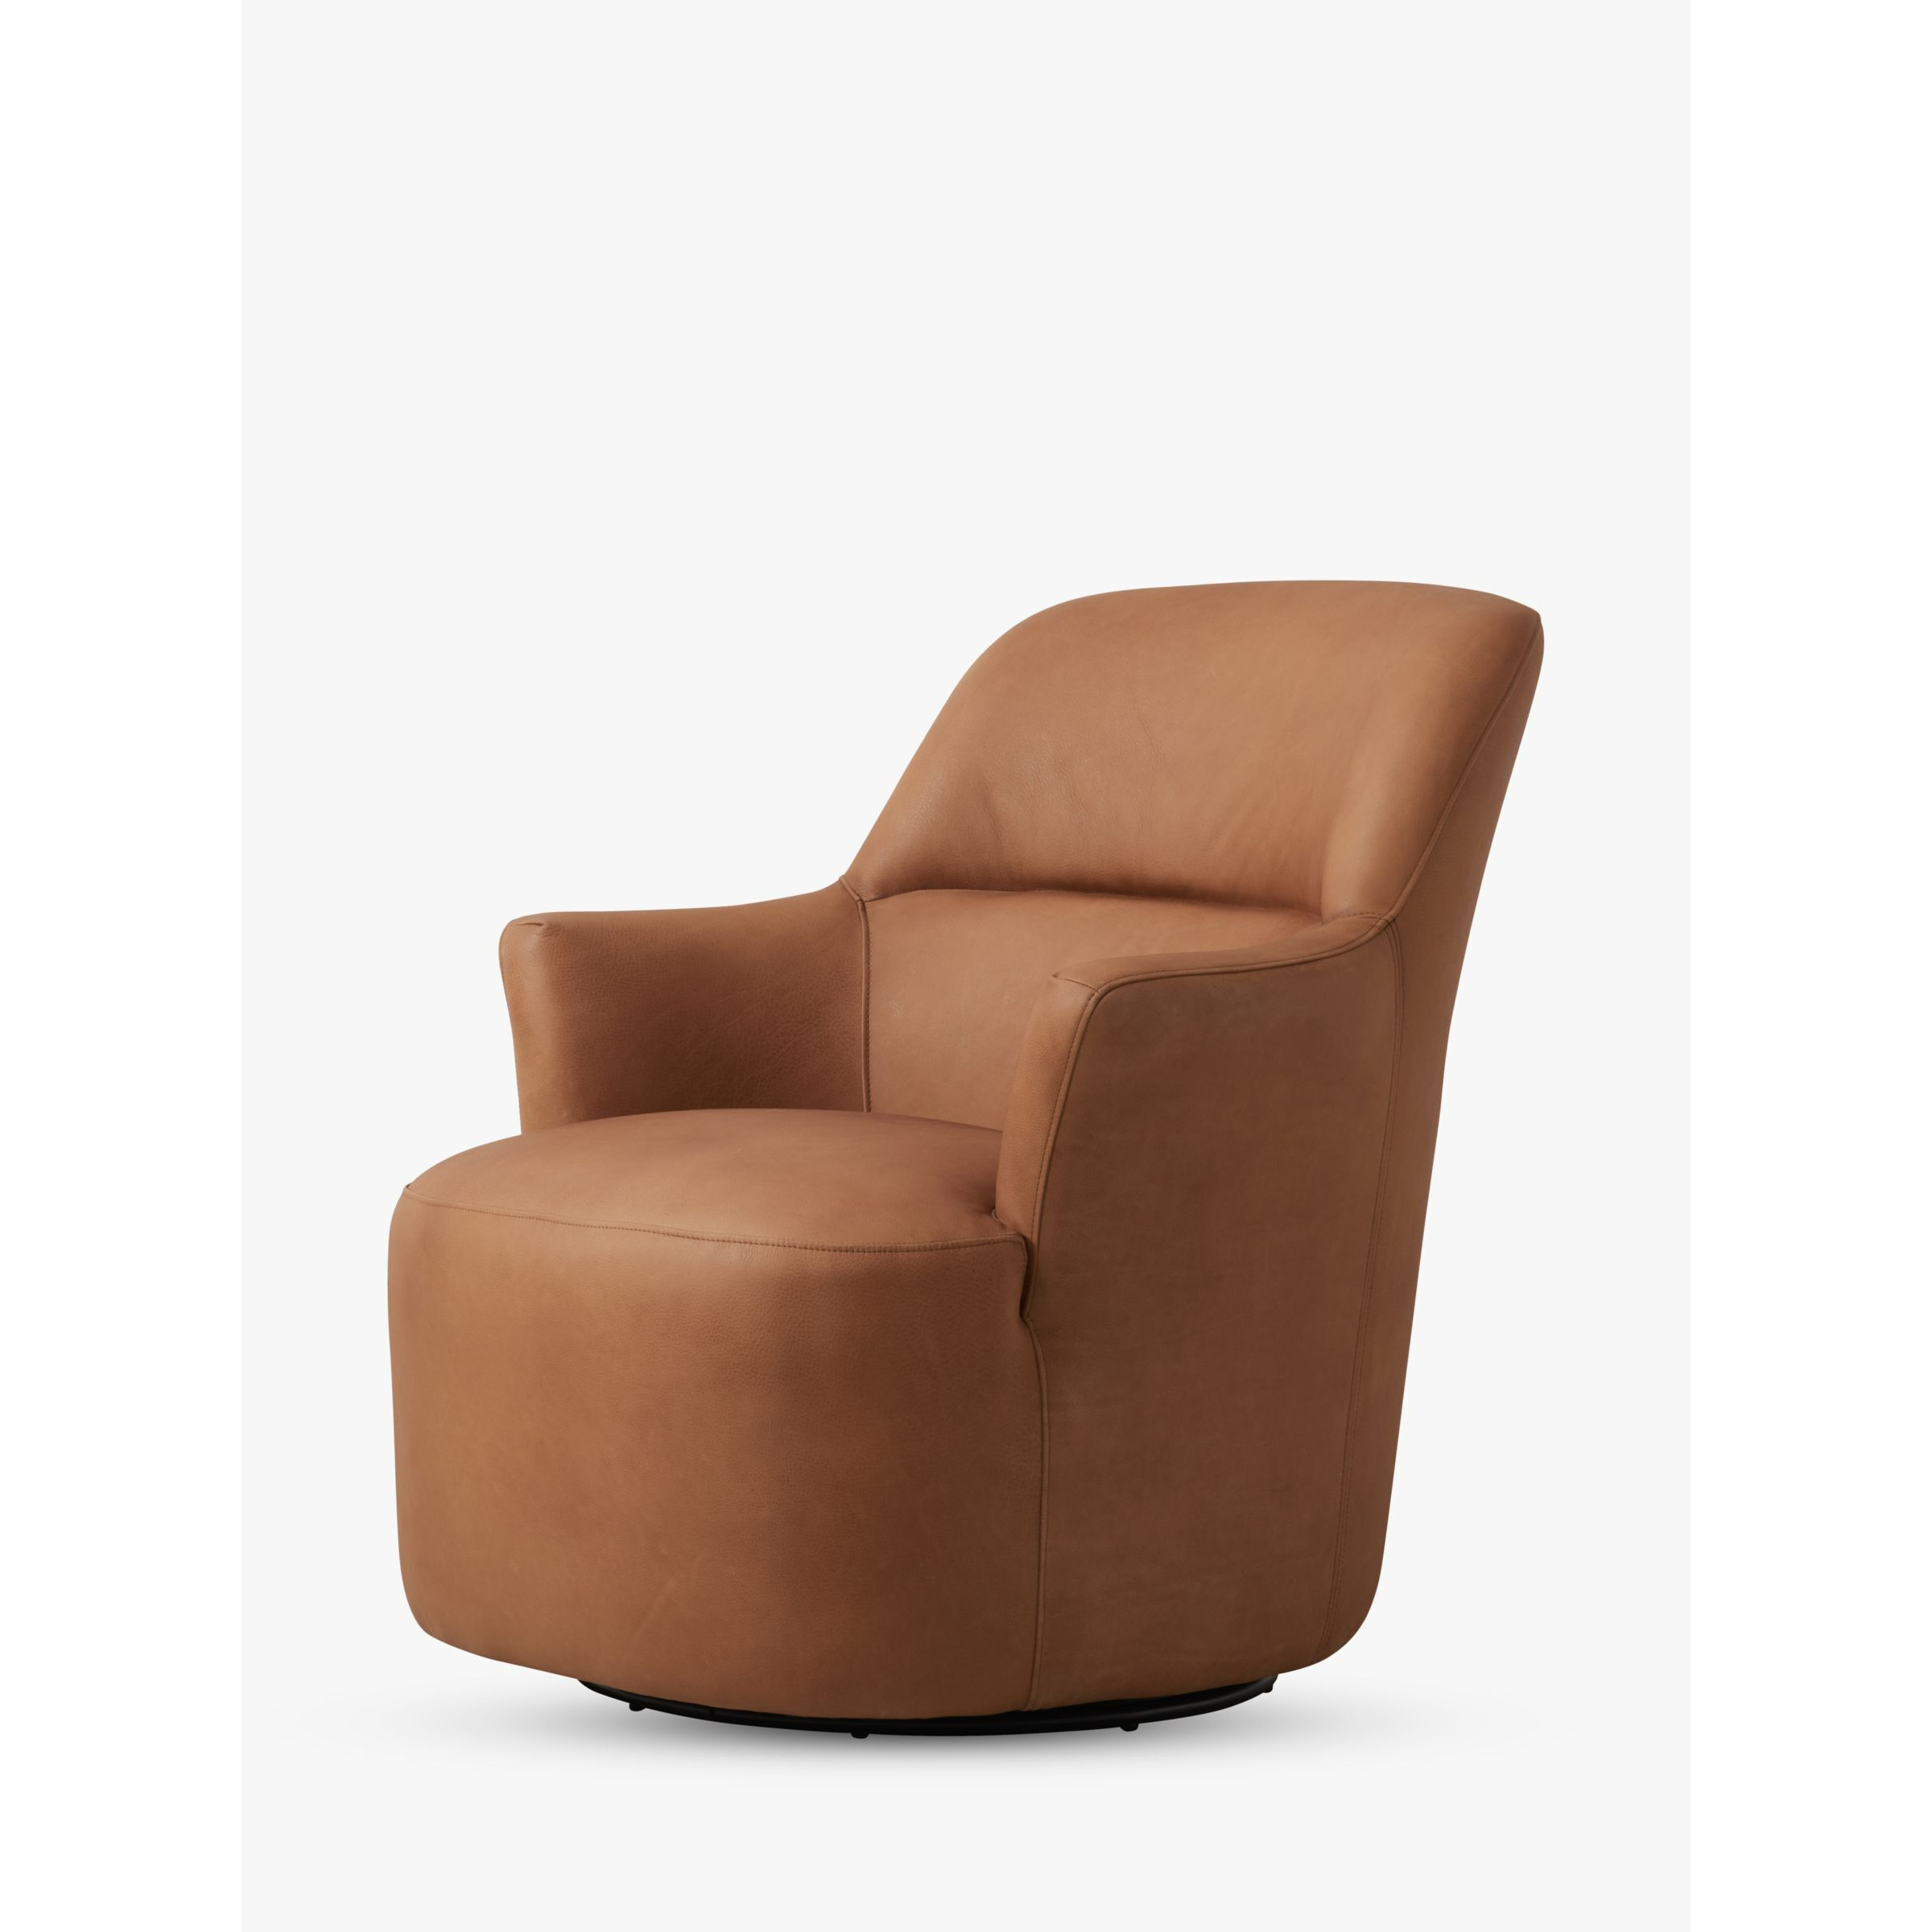 Halo Tuxedo Leather Swivel Chair, Hand Tipped Camel - image 1